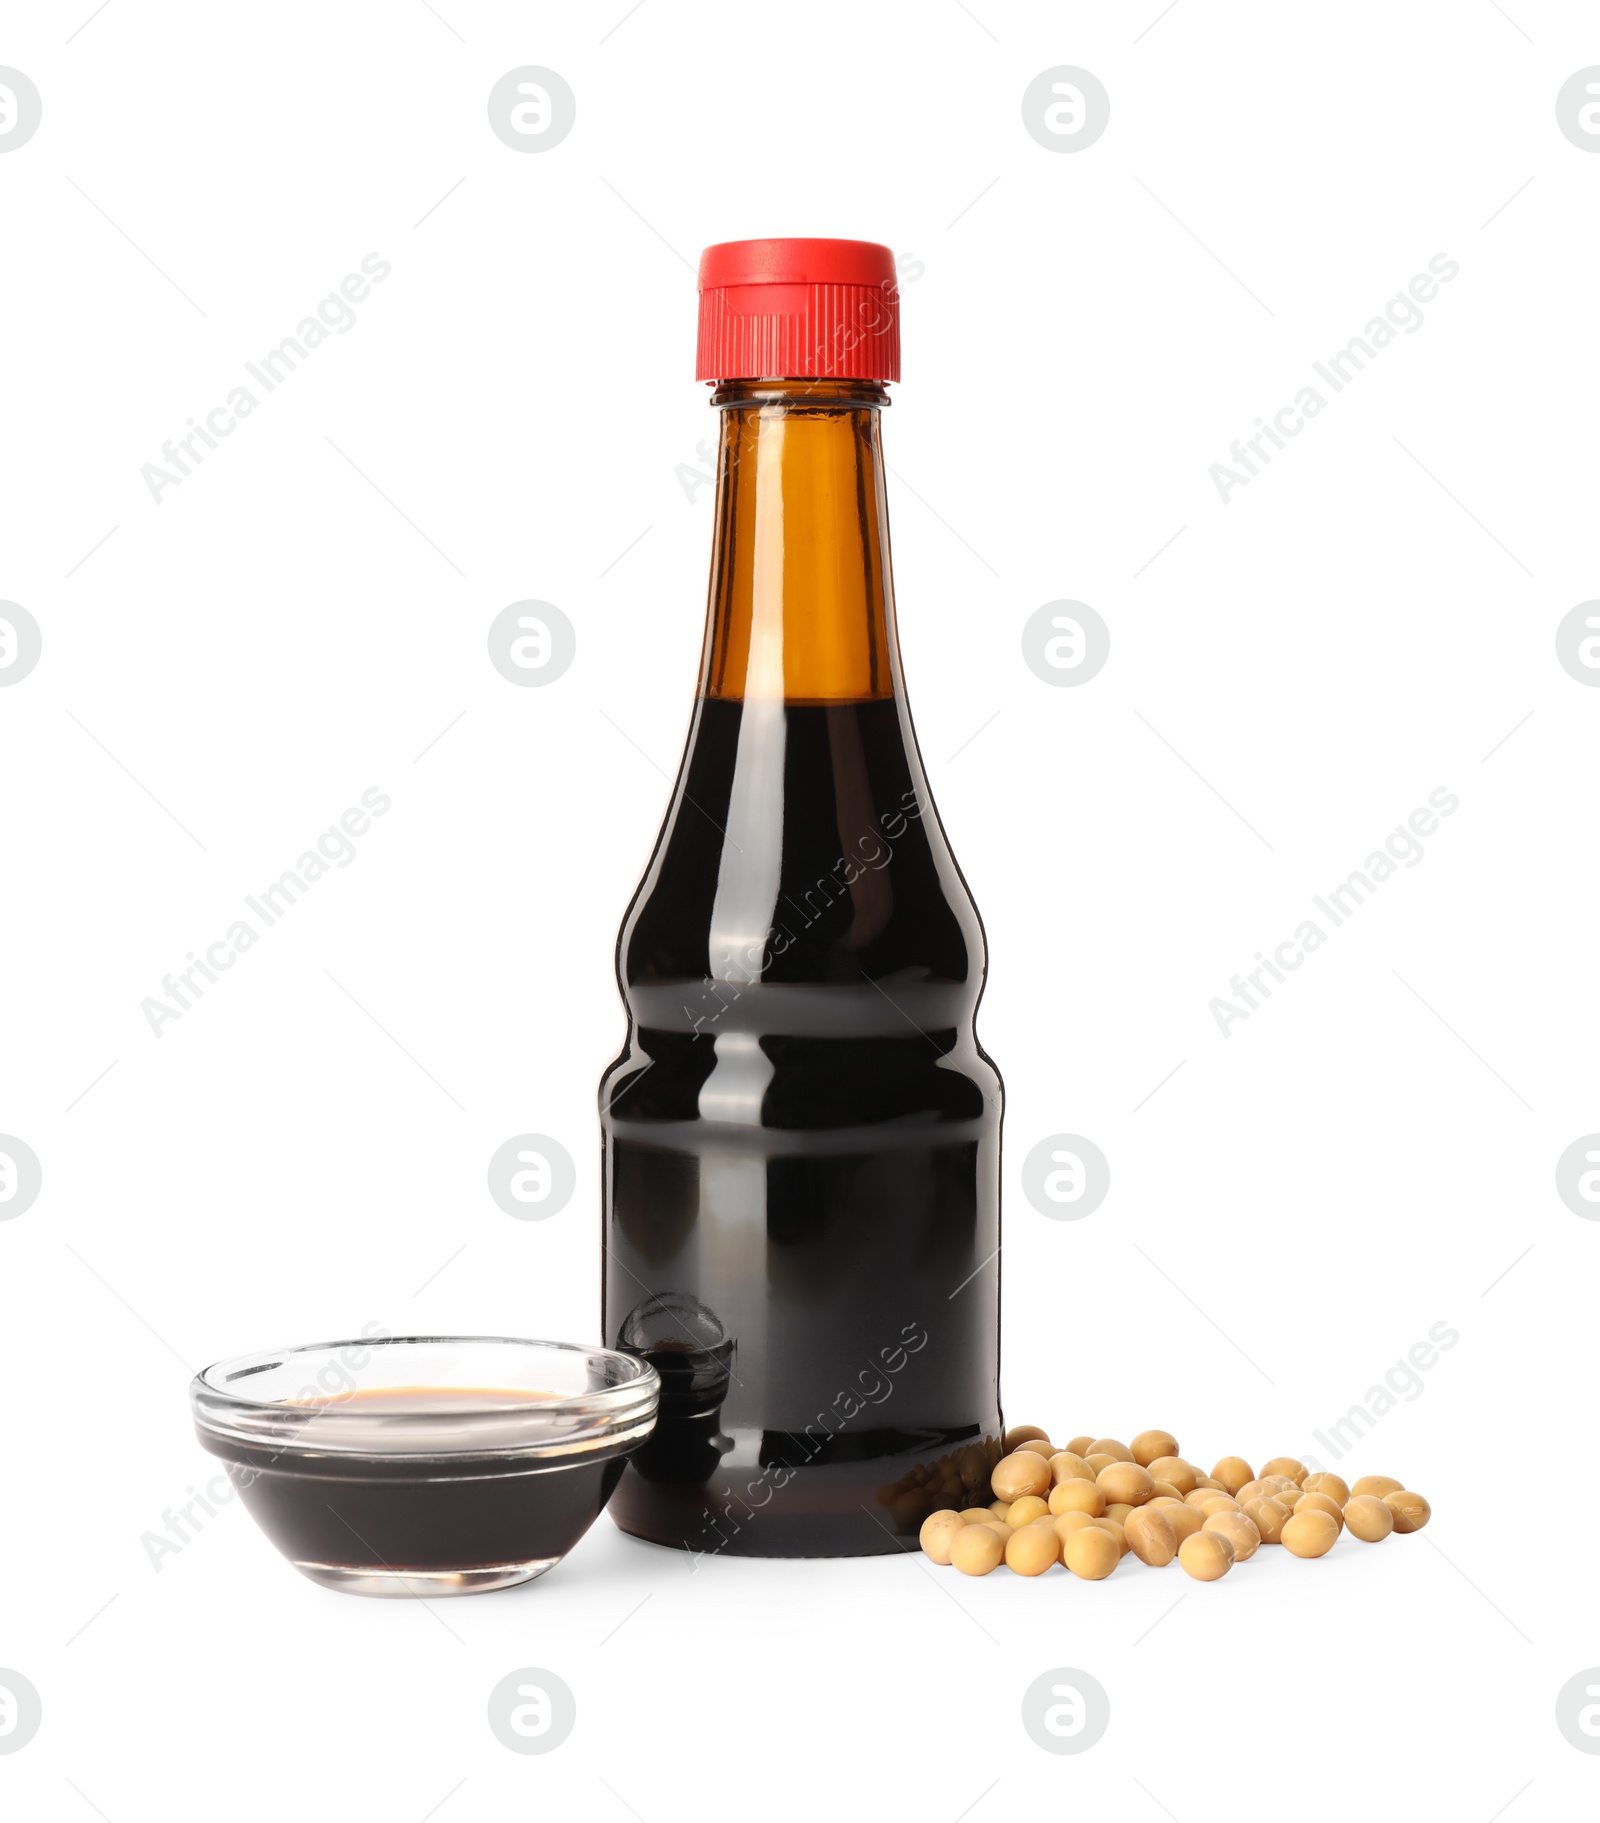 Photo of Natural soy sauce and soybeans isolated on white